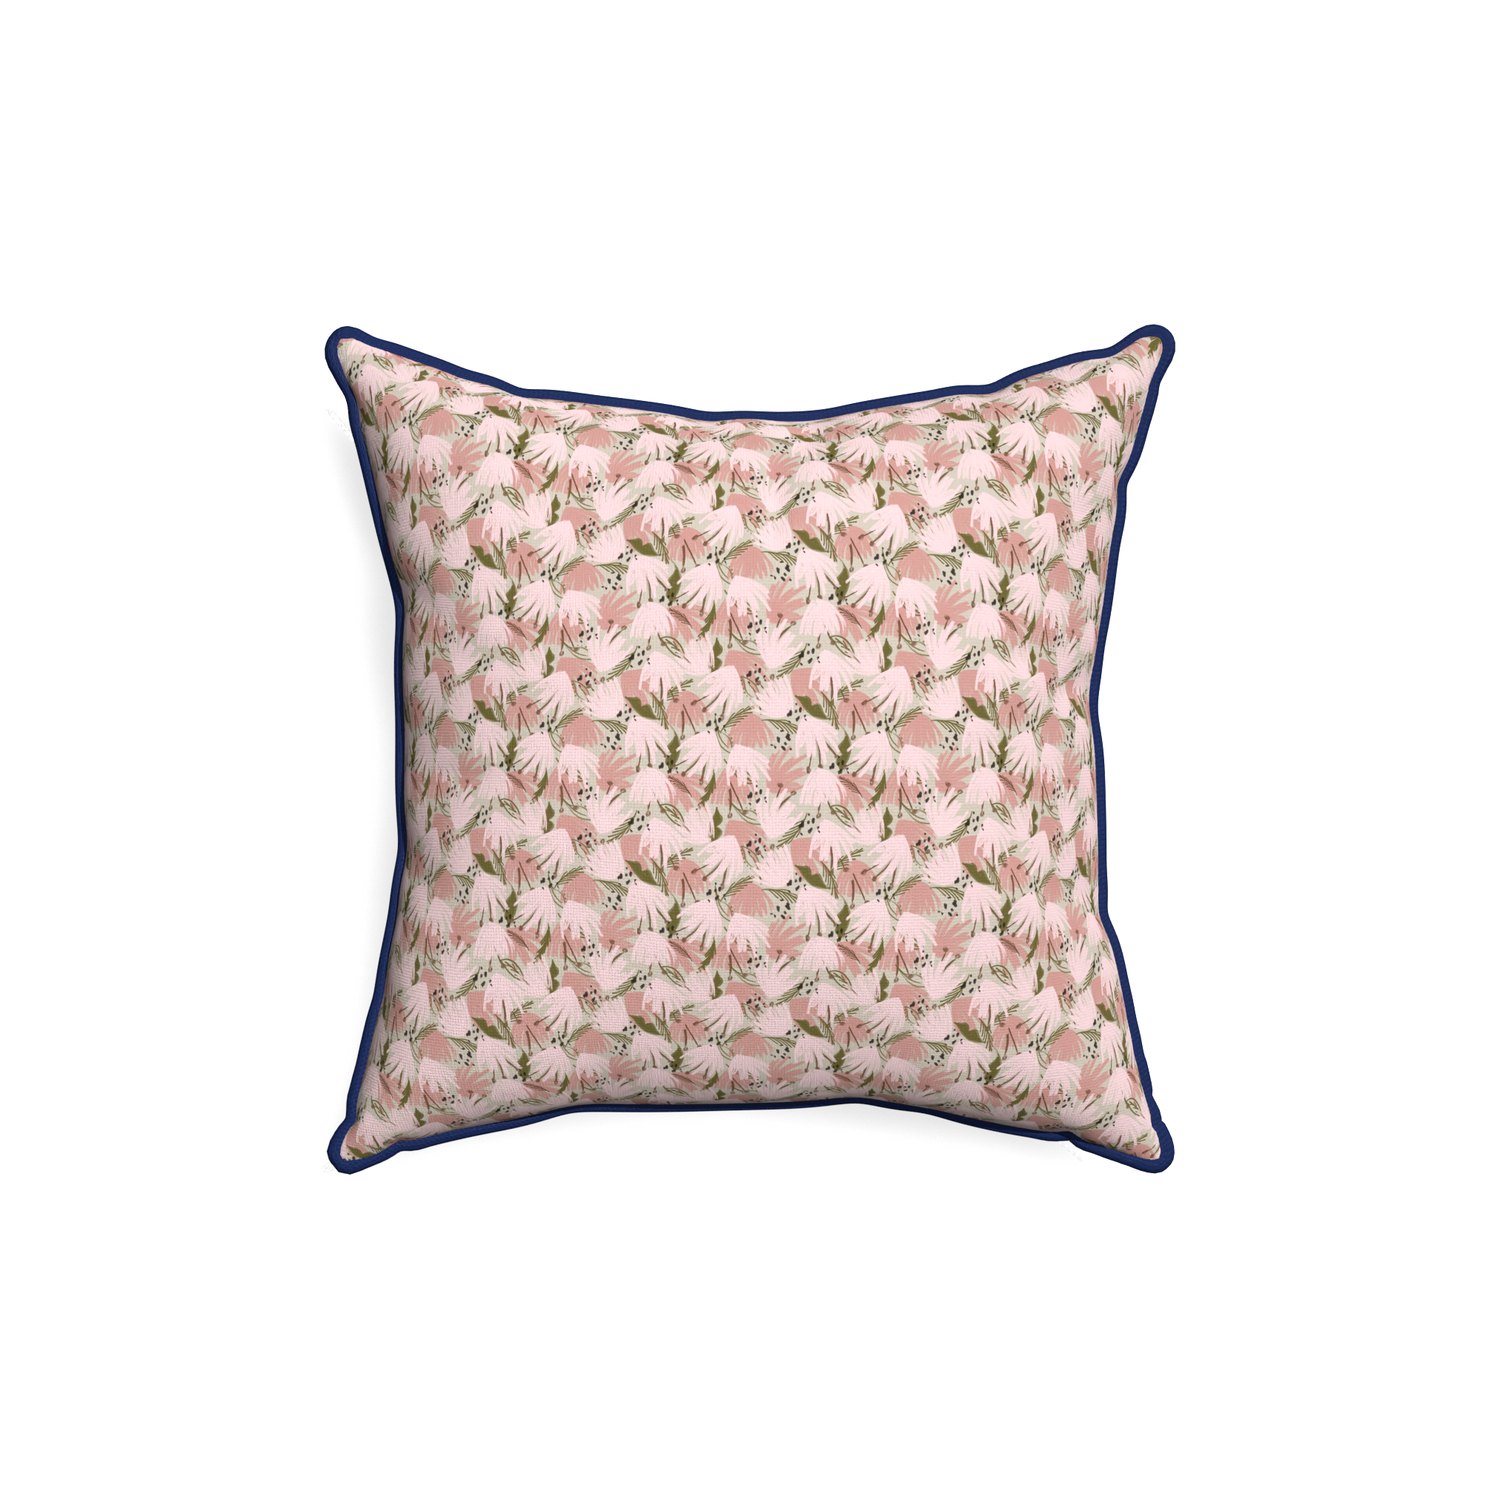 18-square eden pink custom pink floralpillow with midnight piping on white background